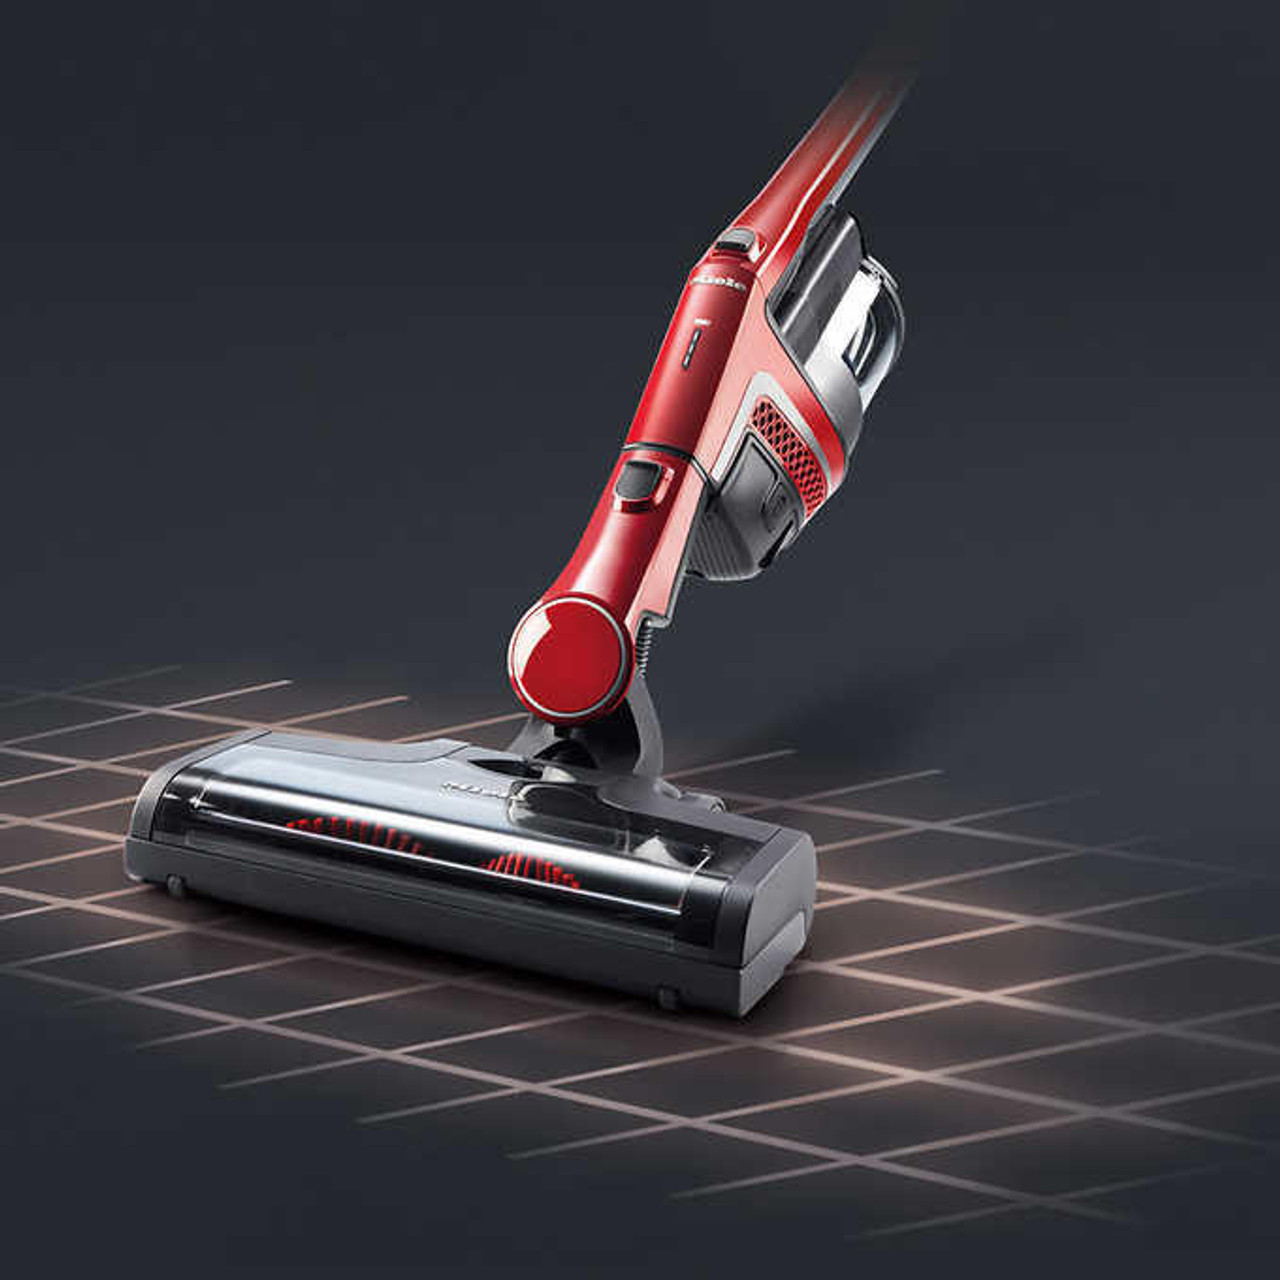 Miele Triflex HX1 3-in-1 Cordless Stick Vacuum, Red - Unleash Cleaning Freedom- Chicken Pieces